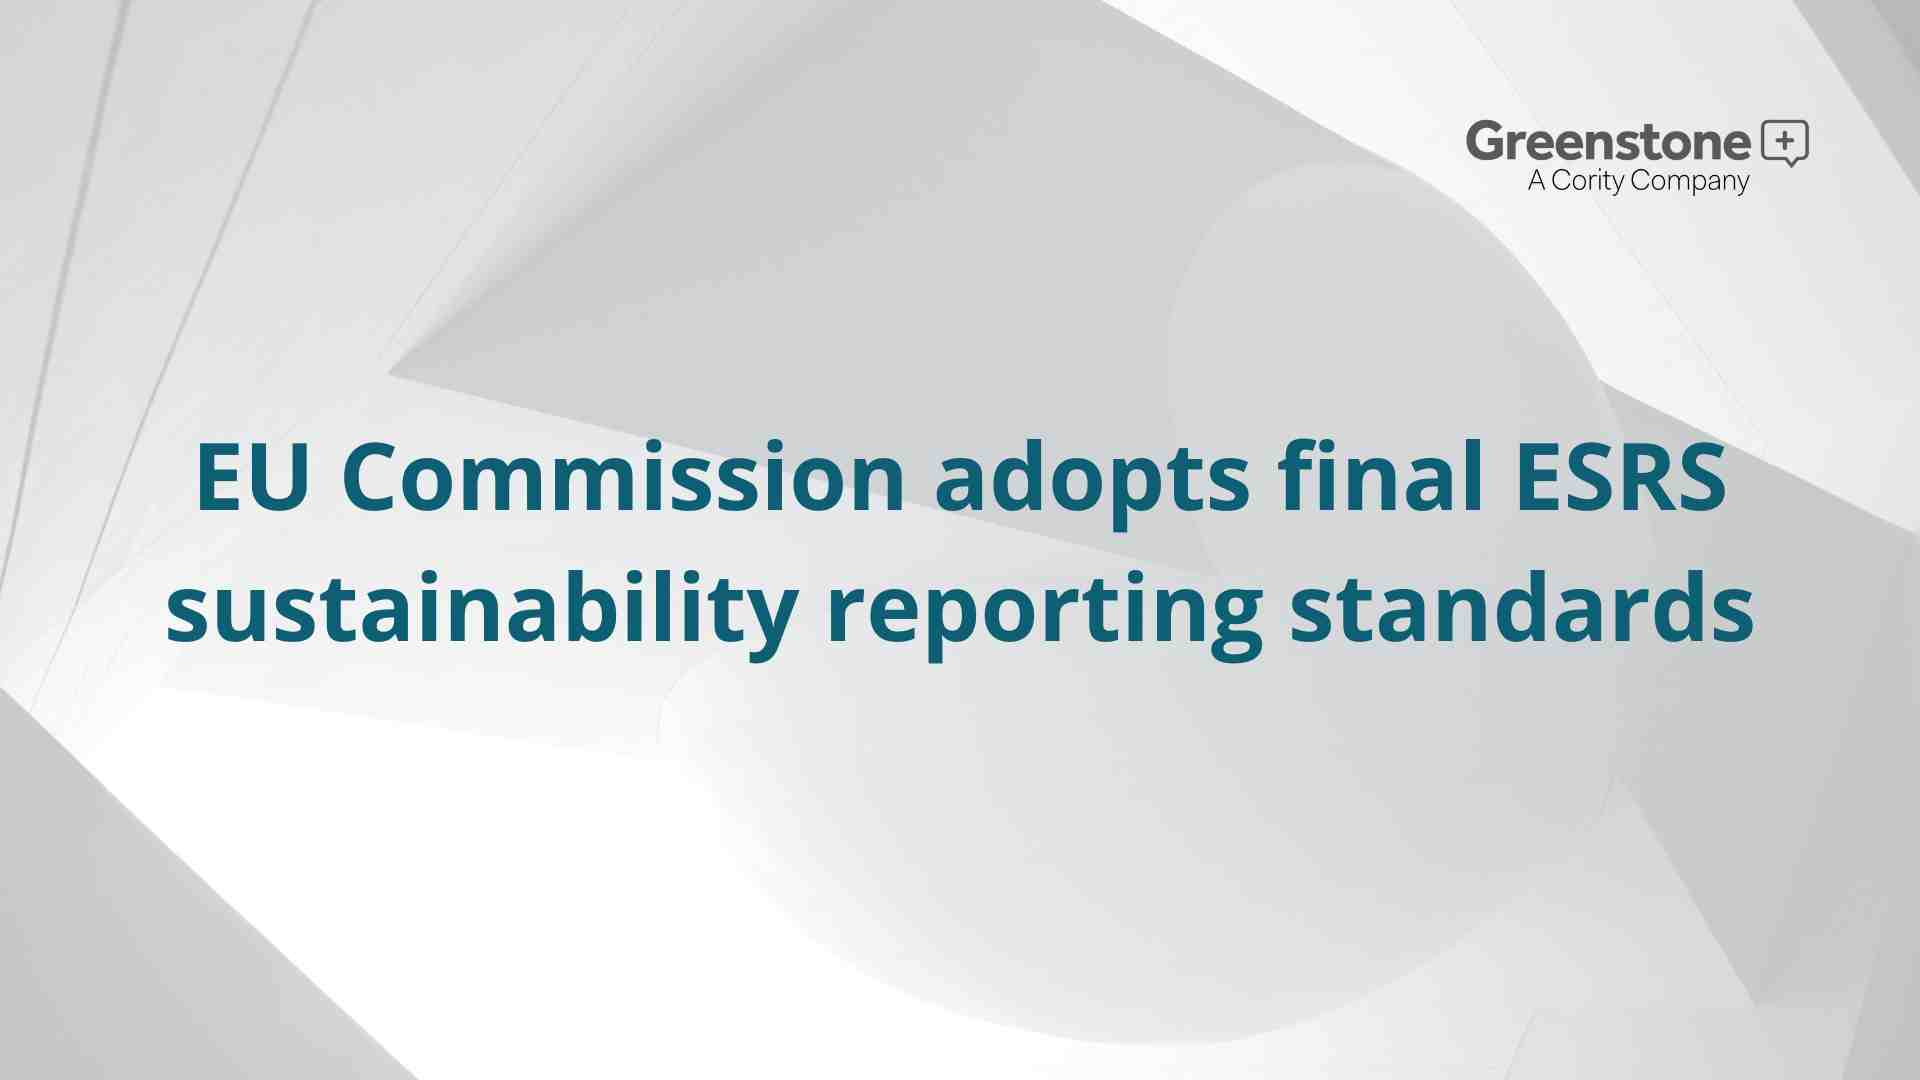 EU Commission adopts final ESRS sustainability reporting standards